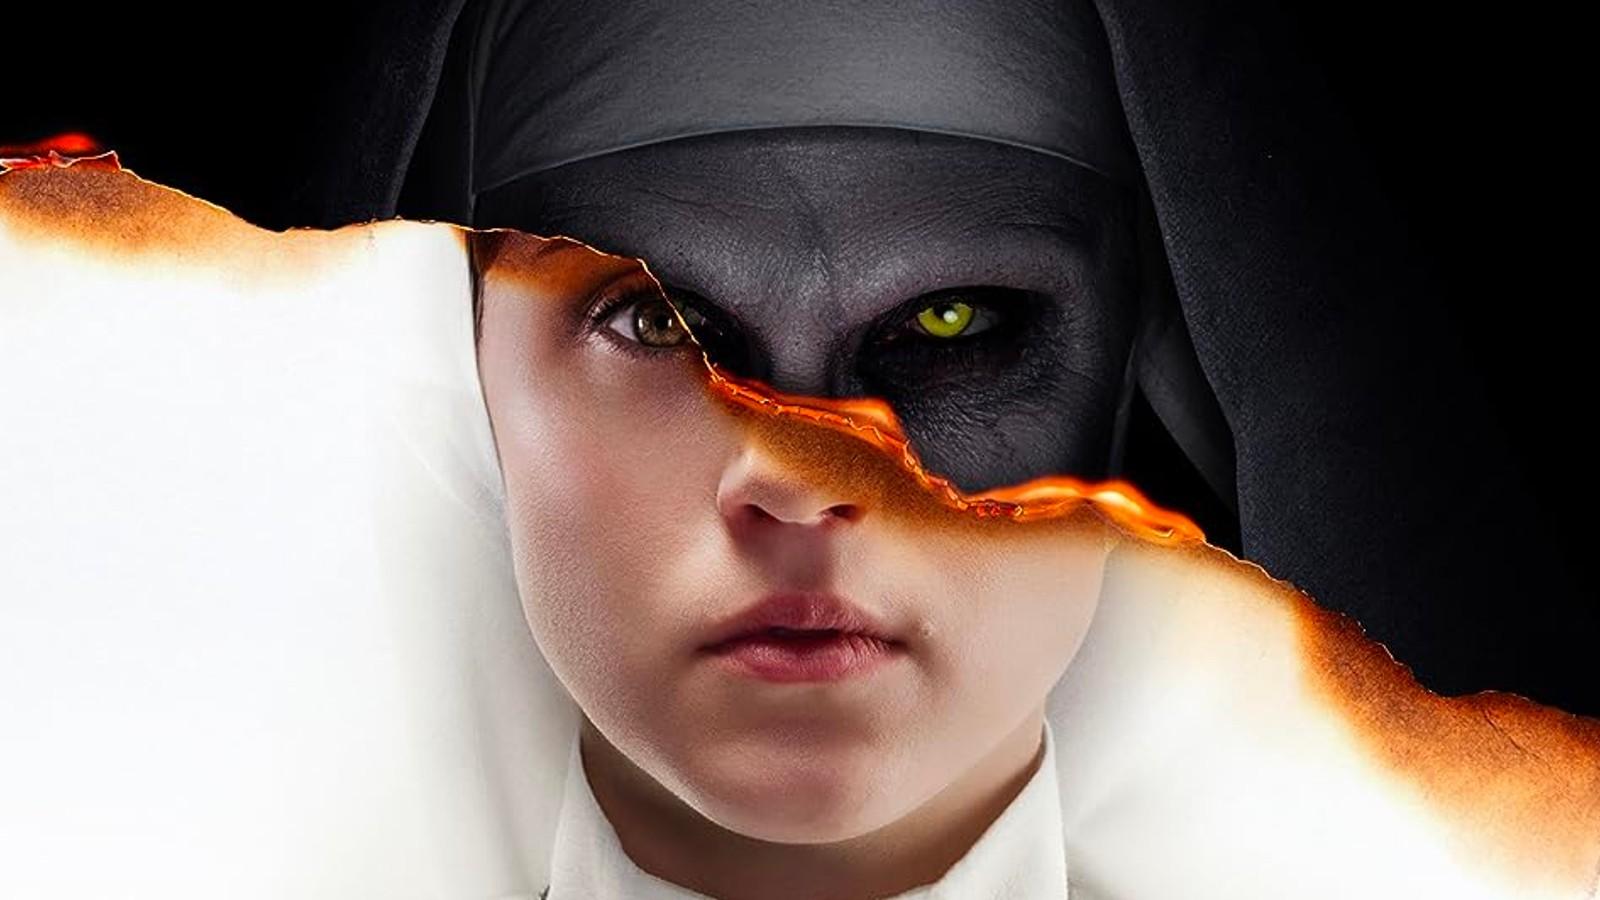 A poster for The Nun